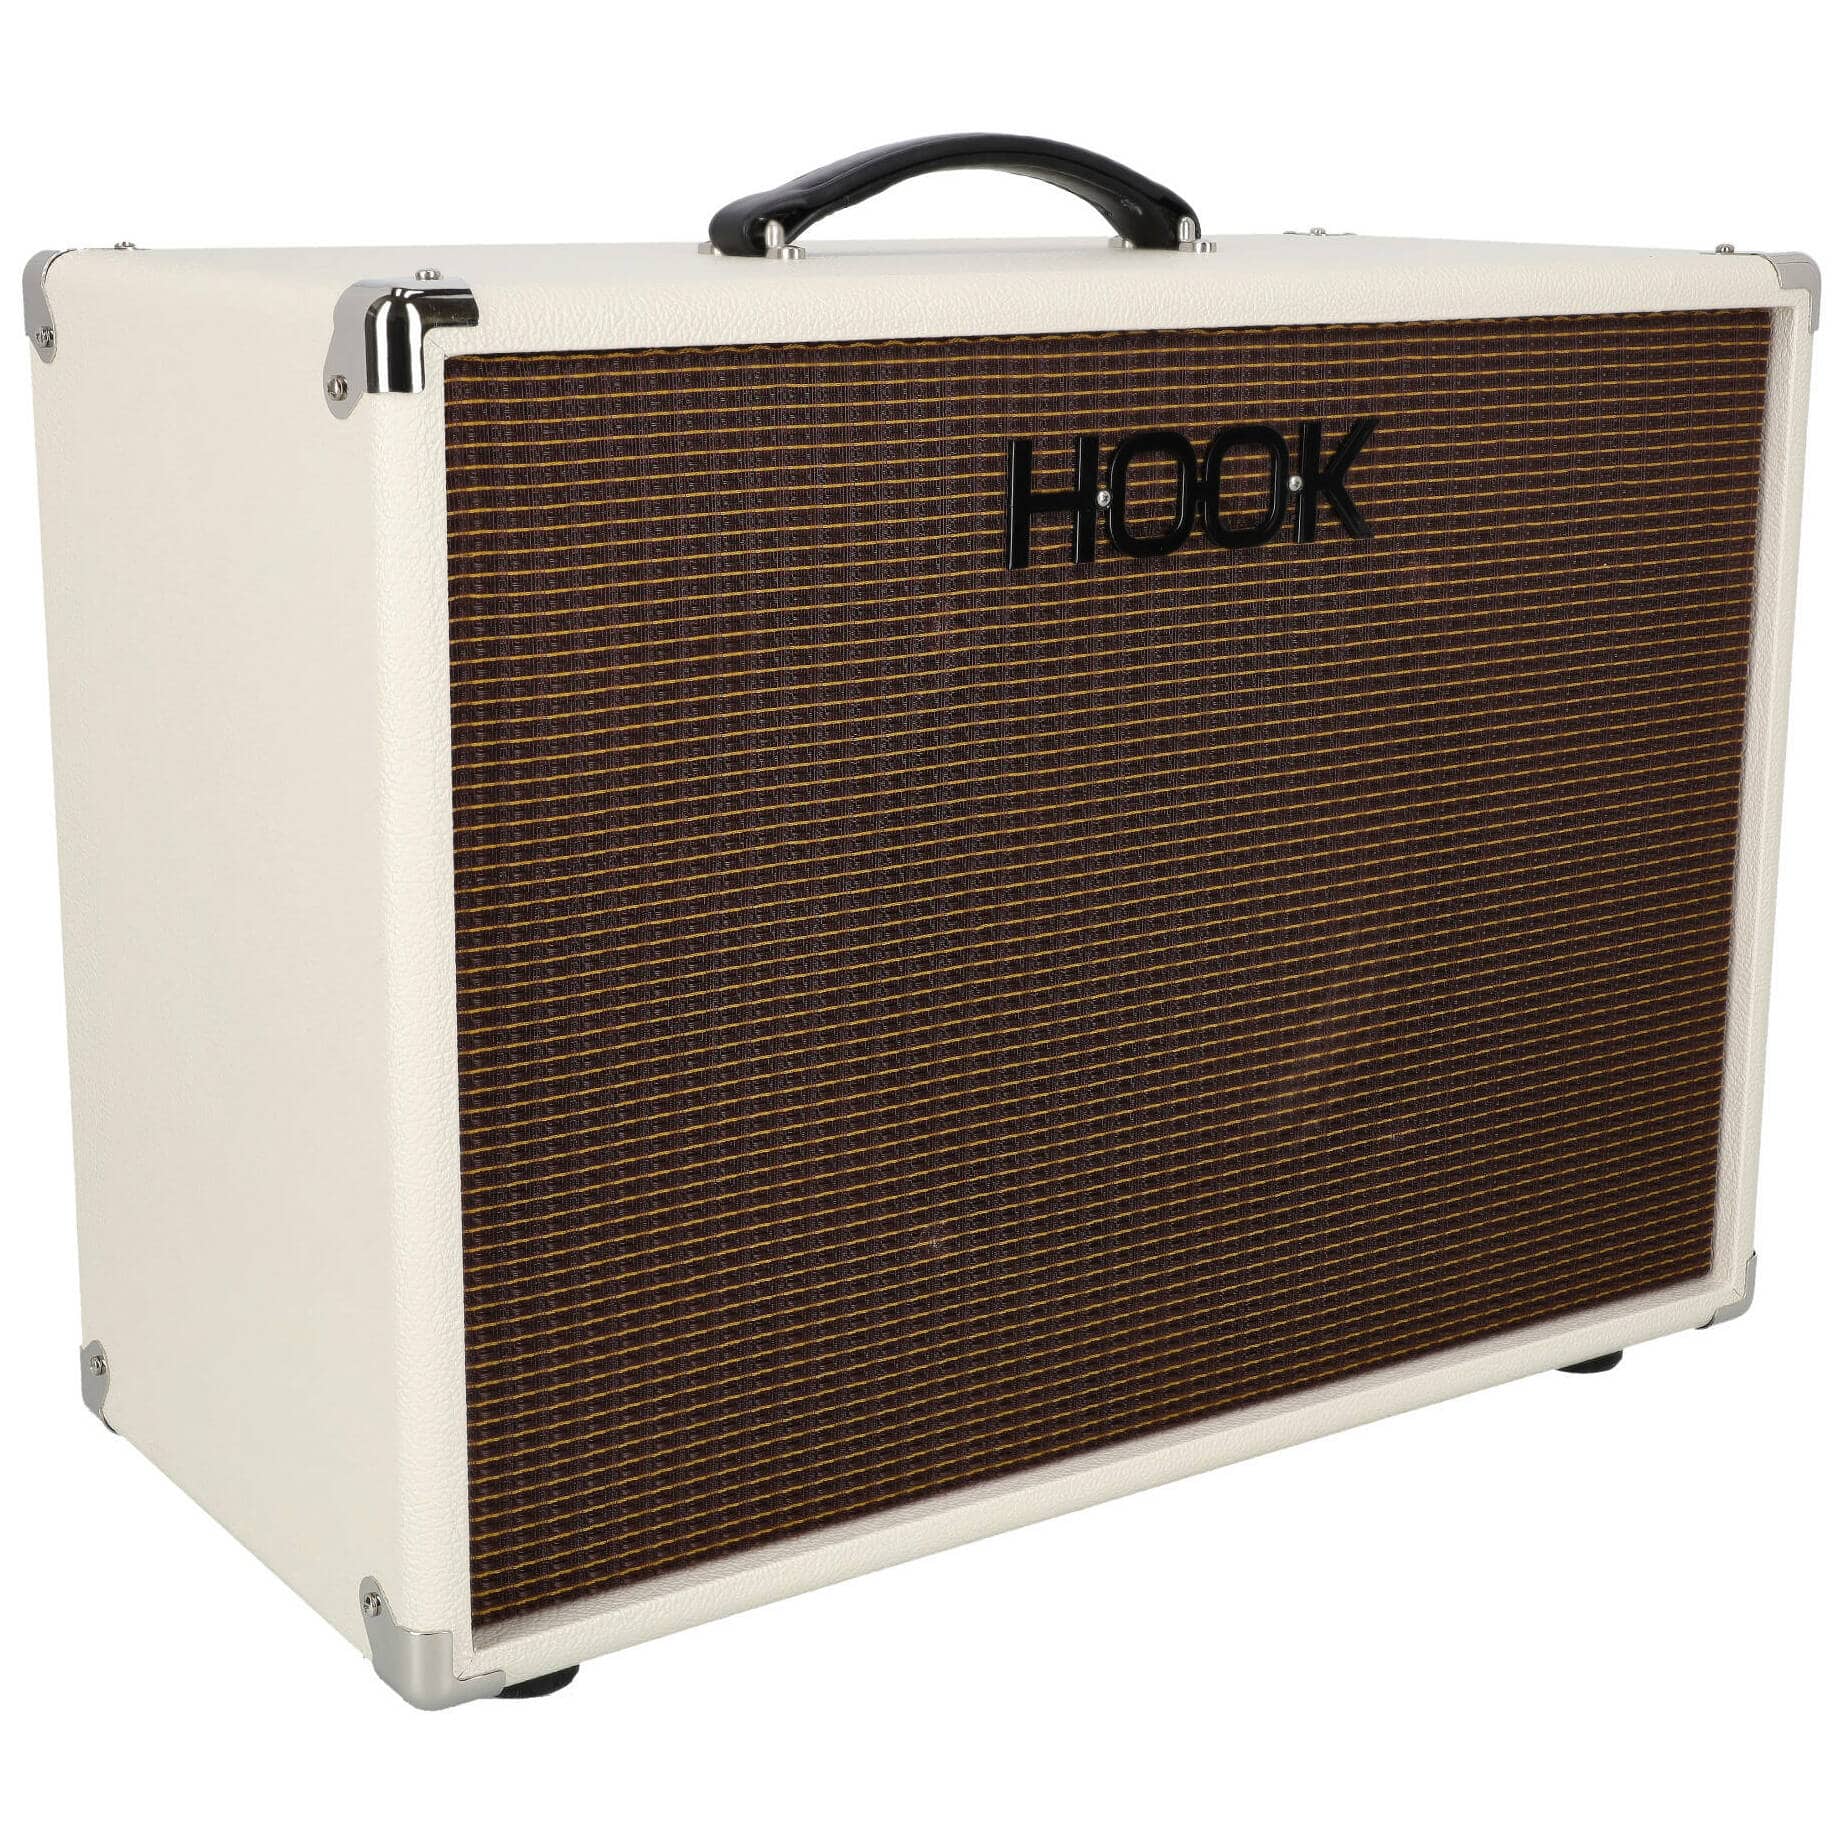 Hook Amplification 1x12 Wizard Cabinet WGS Oval Ivory Oxblood